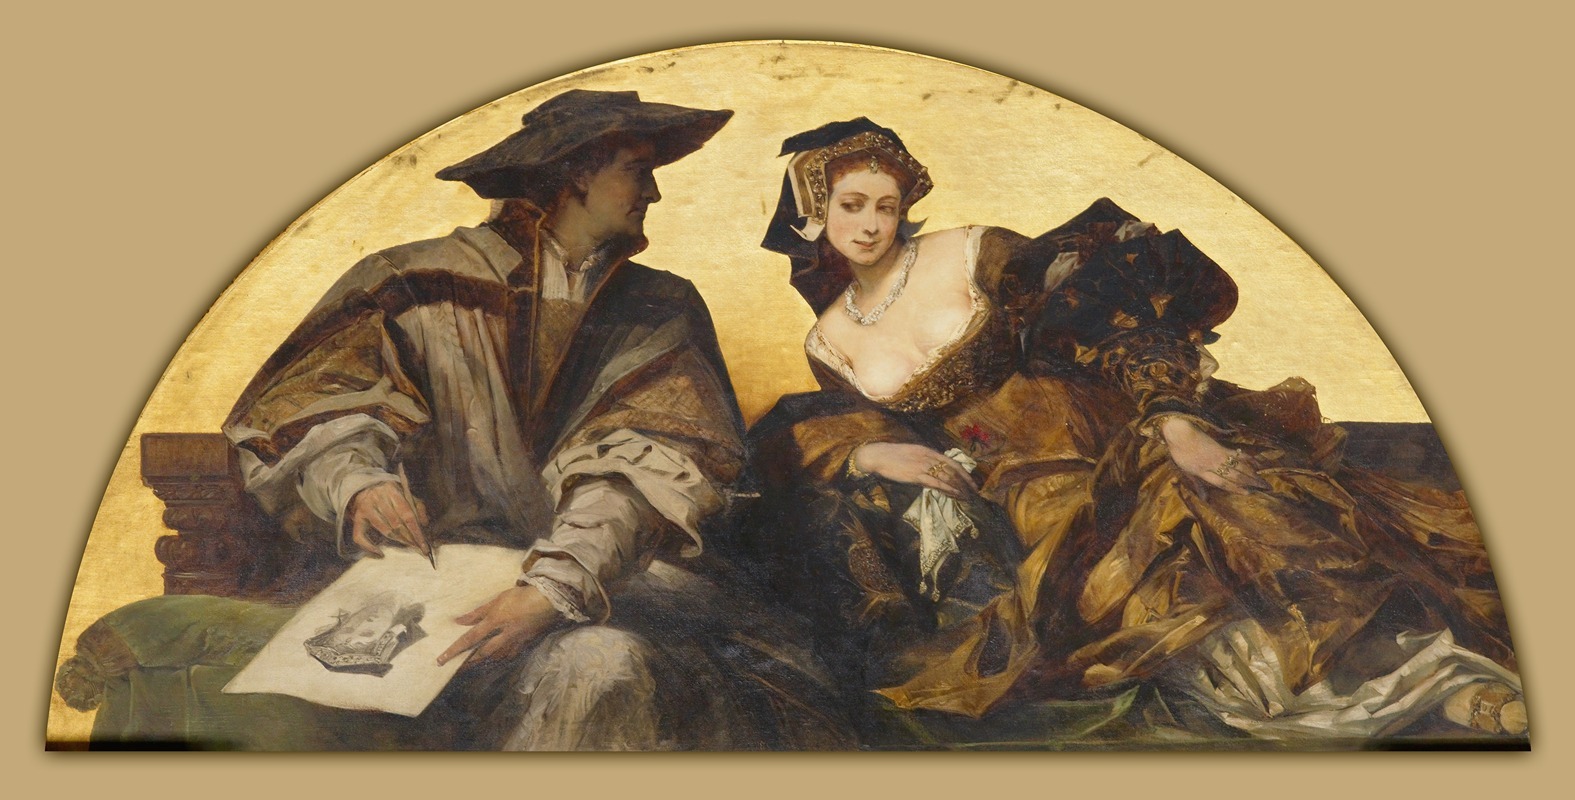 Hans Makart - Hans Holbein the Younger